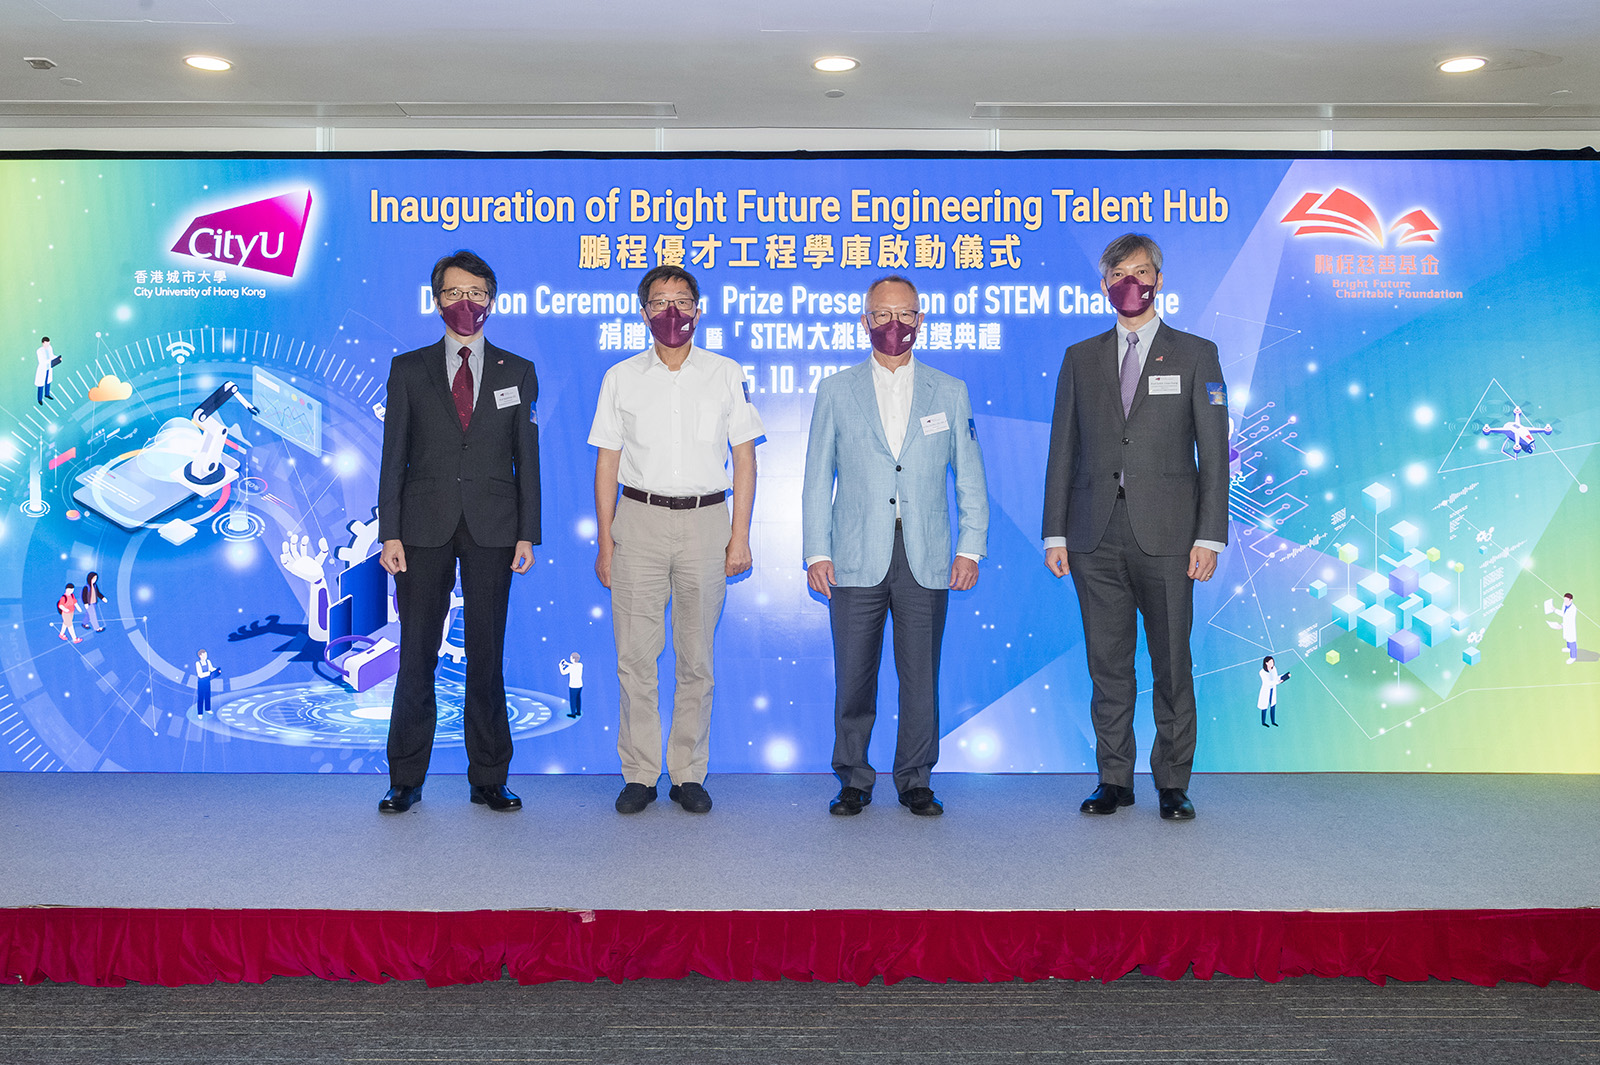 Officiating guests of the Inauguration of Bright Future Engineering Talent Hub included: (from left) Professor Matthew Lee Kwok-on, President Way Kuo, Dr Roy Chung Chi-ping, and Professor Shek Chan-hung.